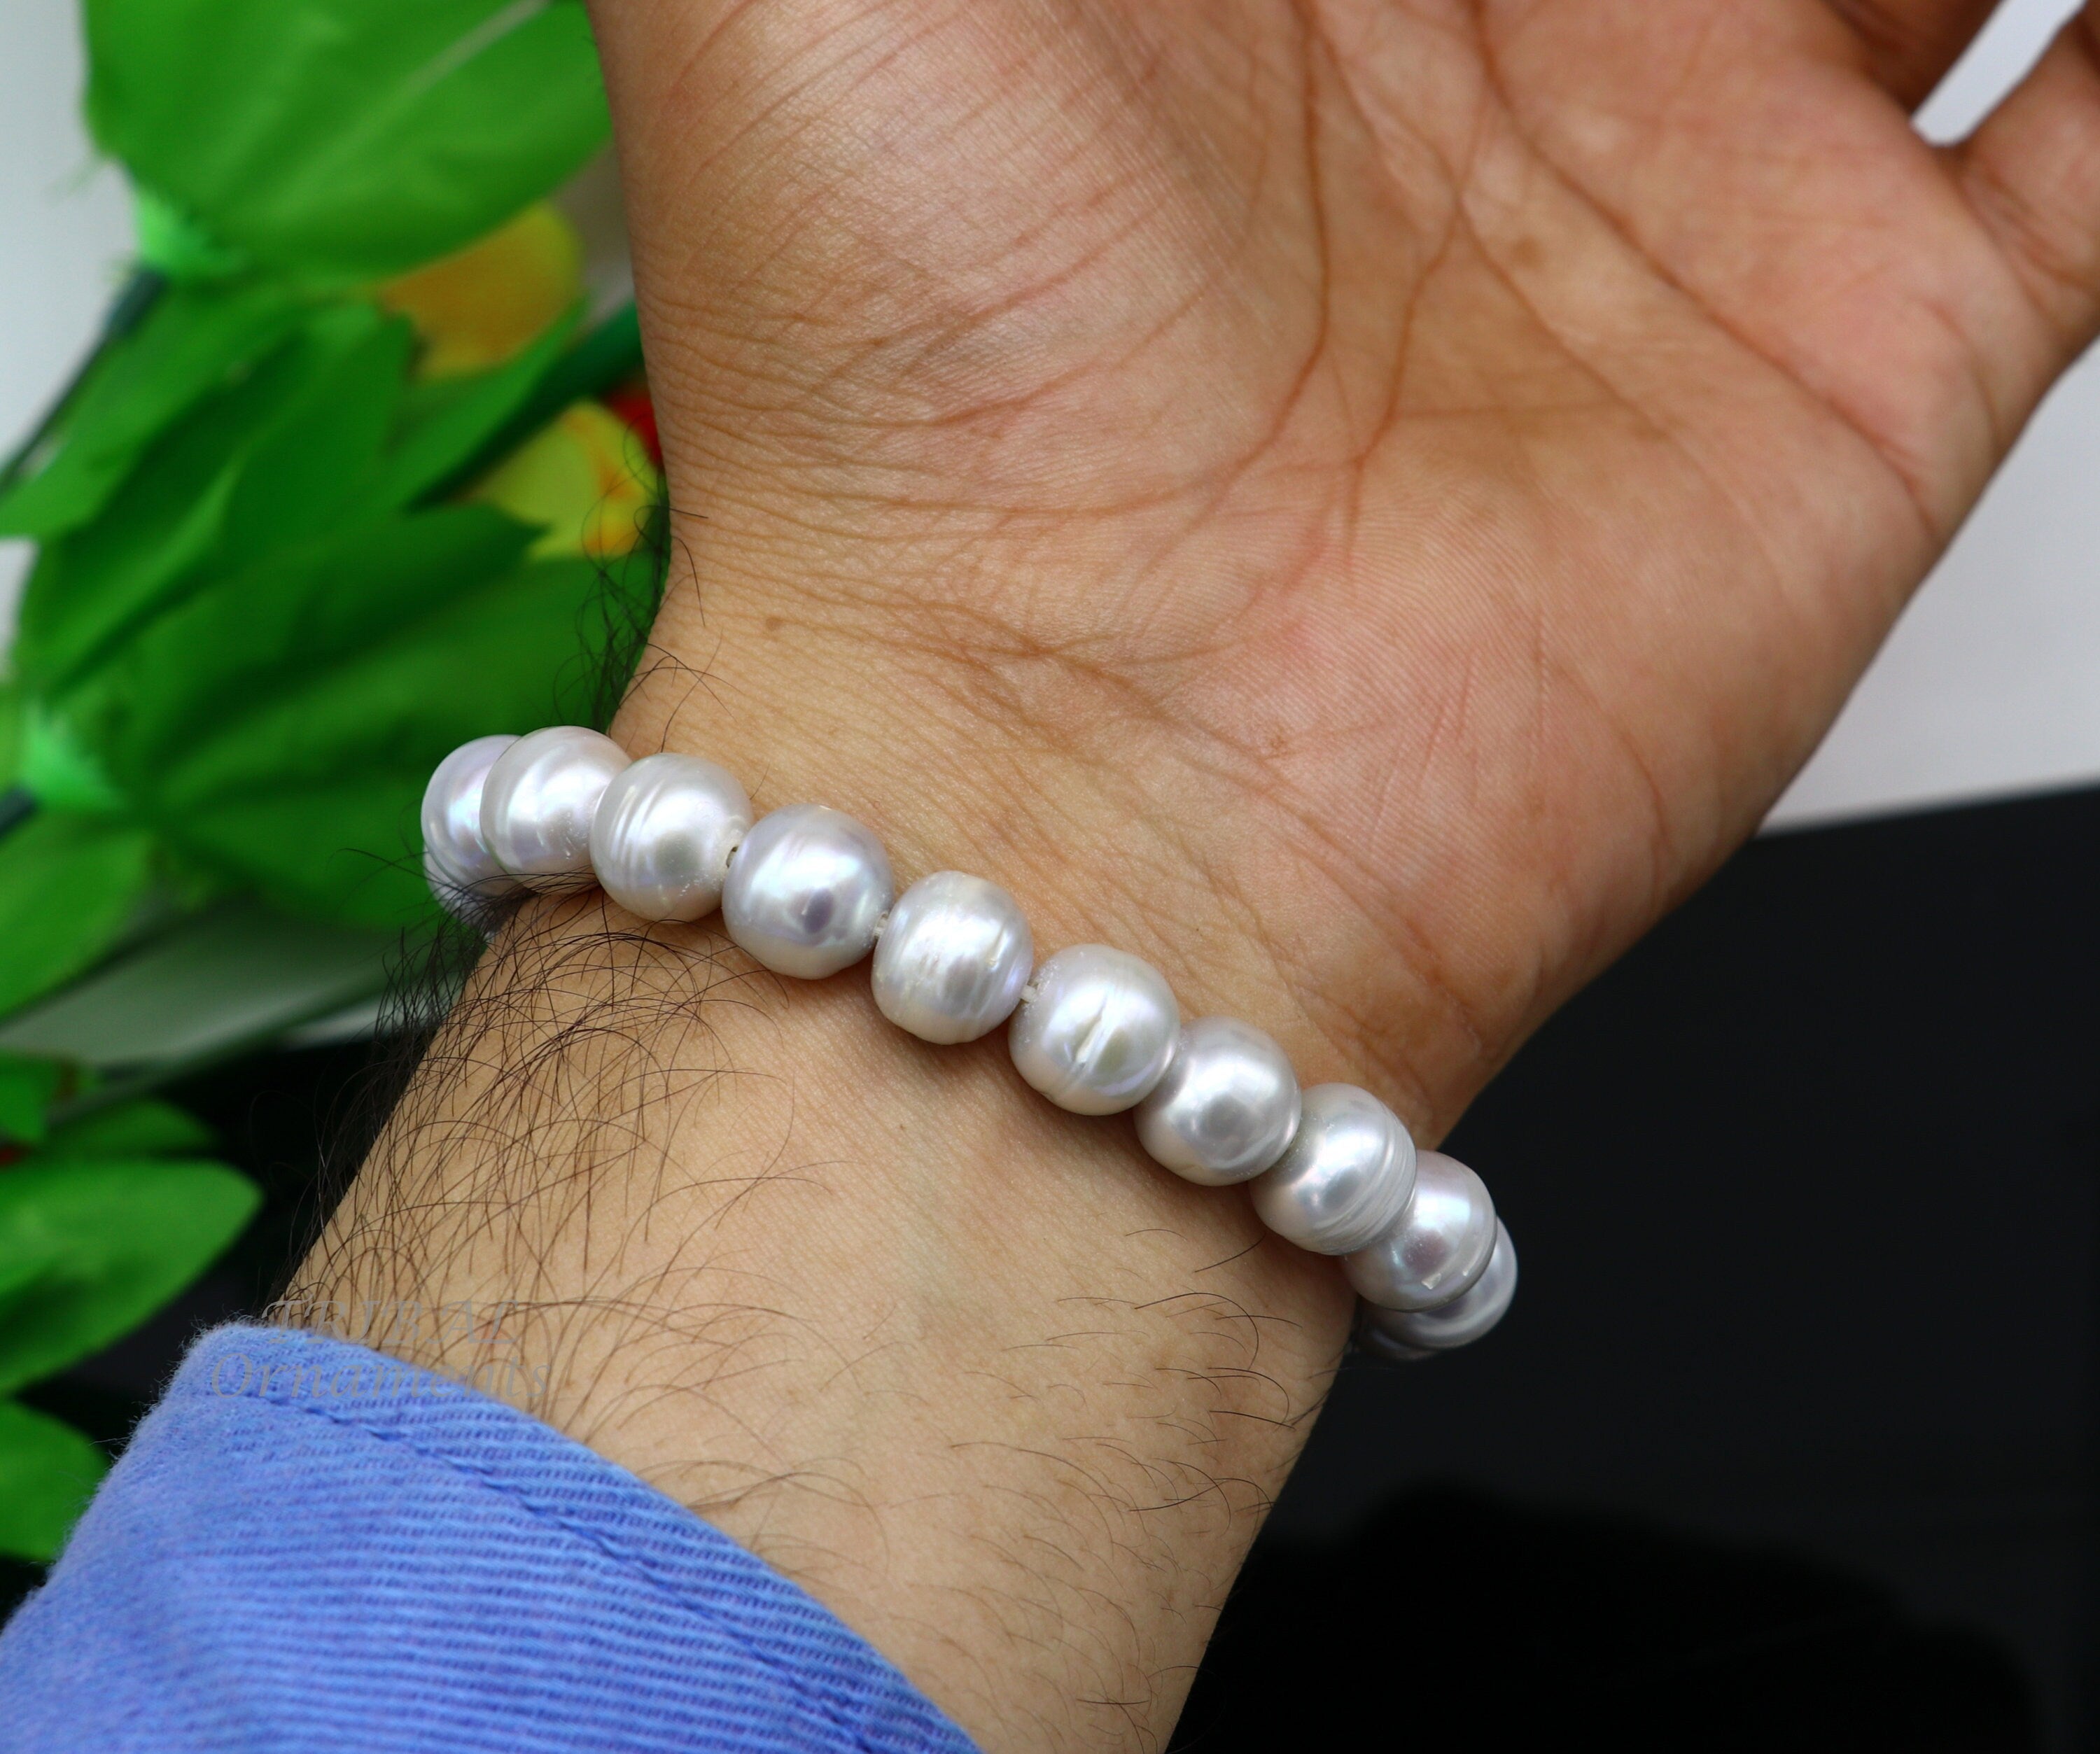 Buy Mens Pearl Bracelet, Mini Mens Pearl Bracelet, Thin Silver Bracelet Men,  Thin Bracelets for Men, Mens Jewelry Gifts by Twistedpendant Online in  India - Etsy